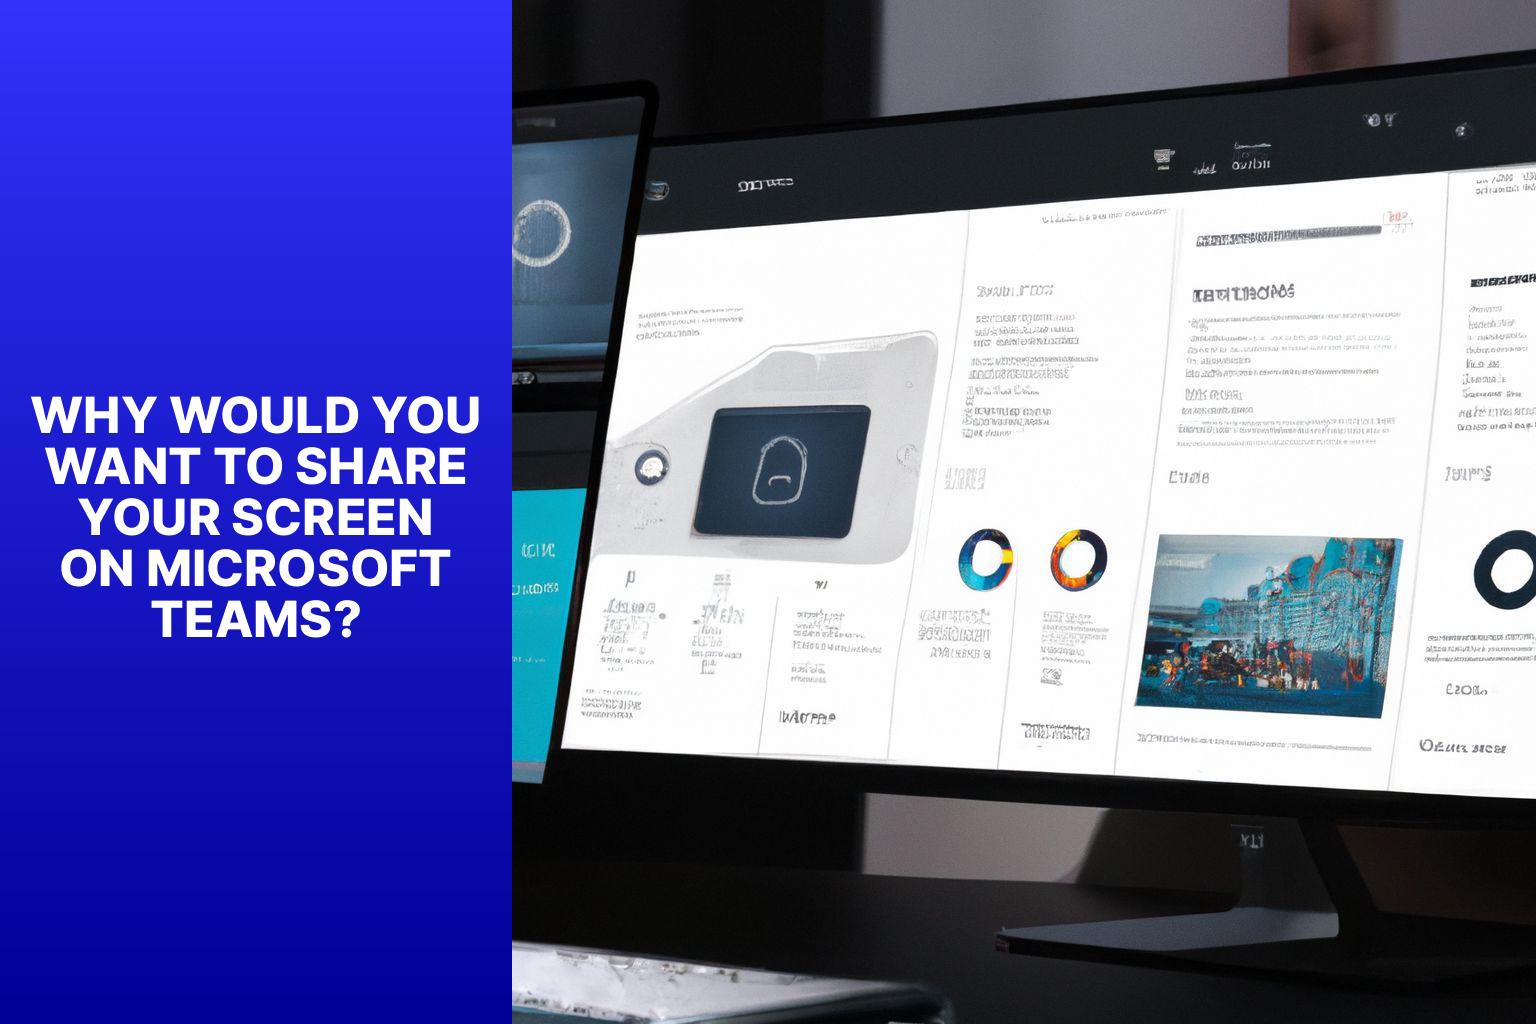 Why would you want to share your screen on Microsoft Teams? - how to share screen on microsoft teams 